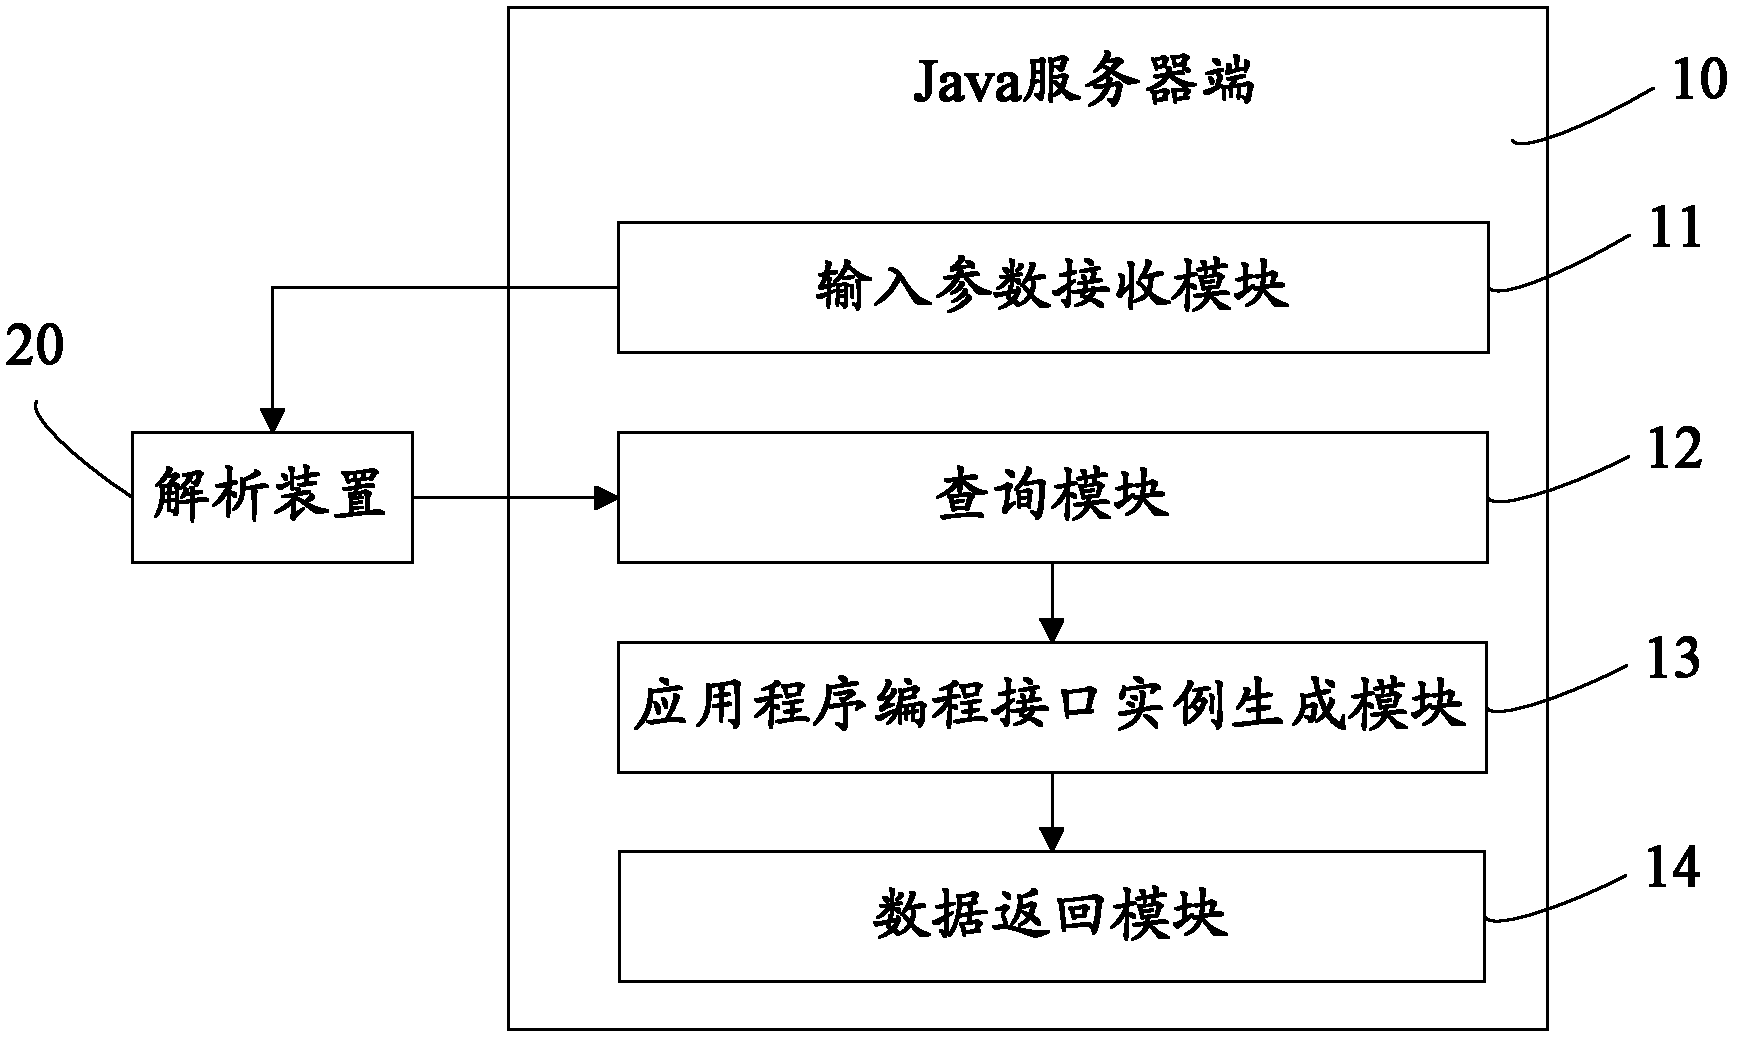 Java system application programming interface calling method and system using the same